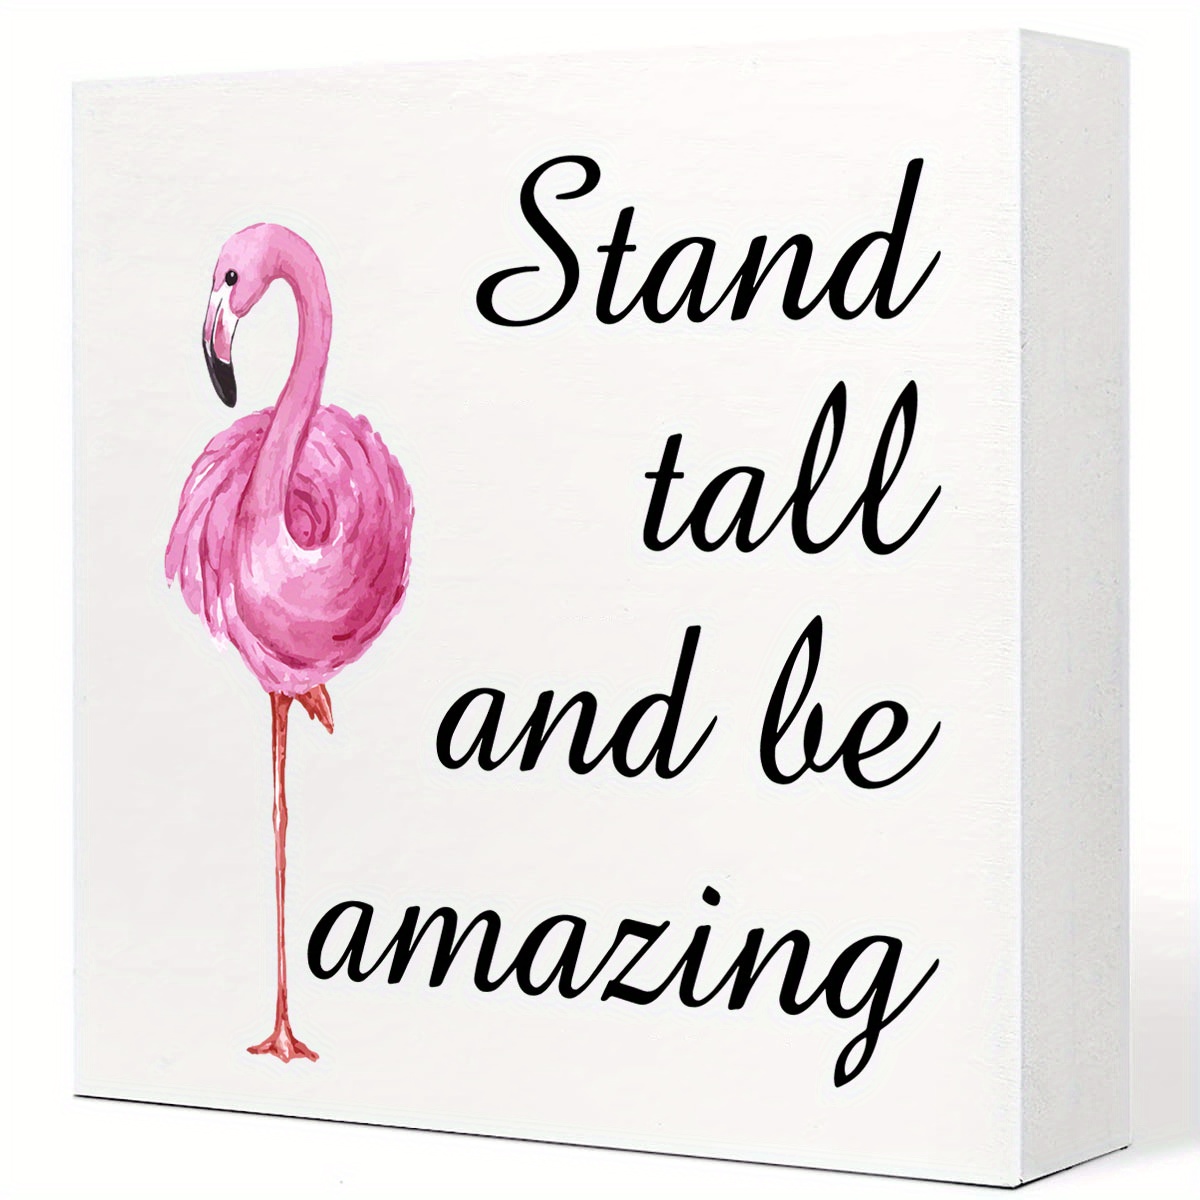 

1pc Pink Flamingo Canvas Prints Wall Art Decor Desk Sign Stand Tall And Be Amazing Flamingo Quote Poster Painting Framed Artwork Rustic Home Shelf Wall Decoration